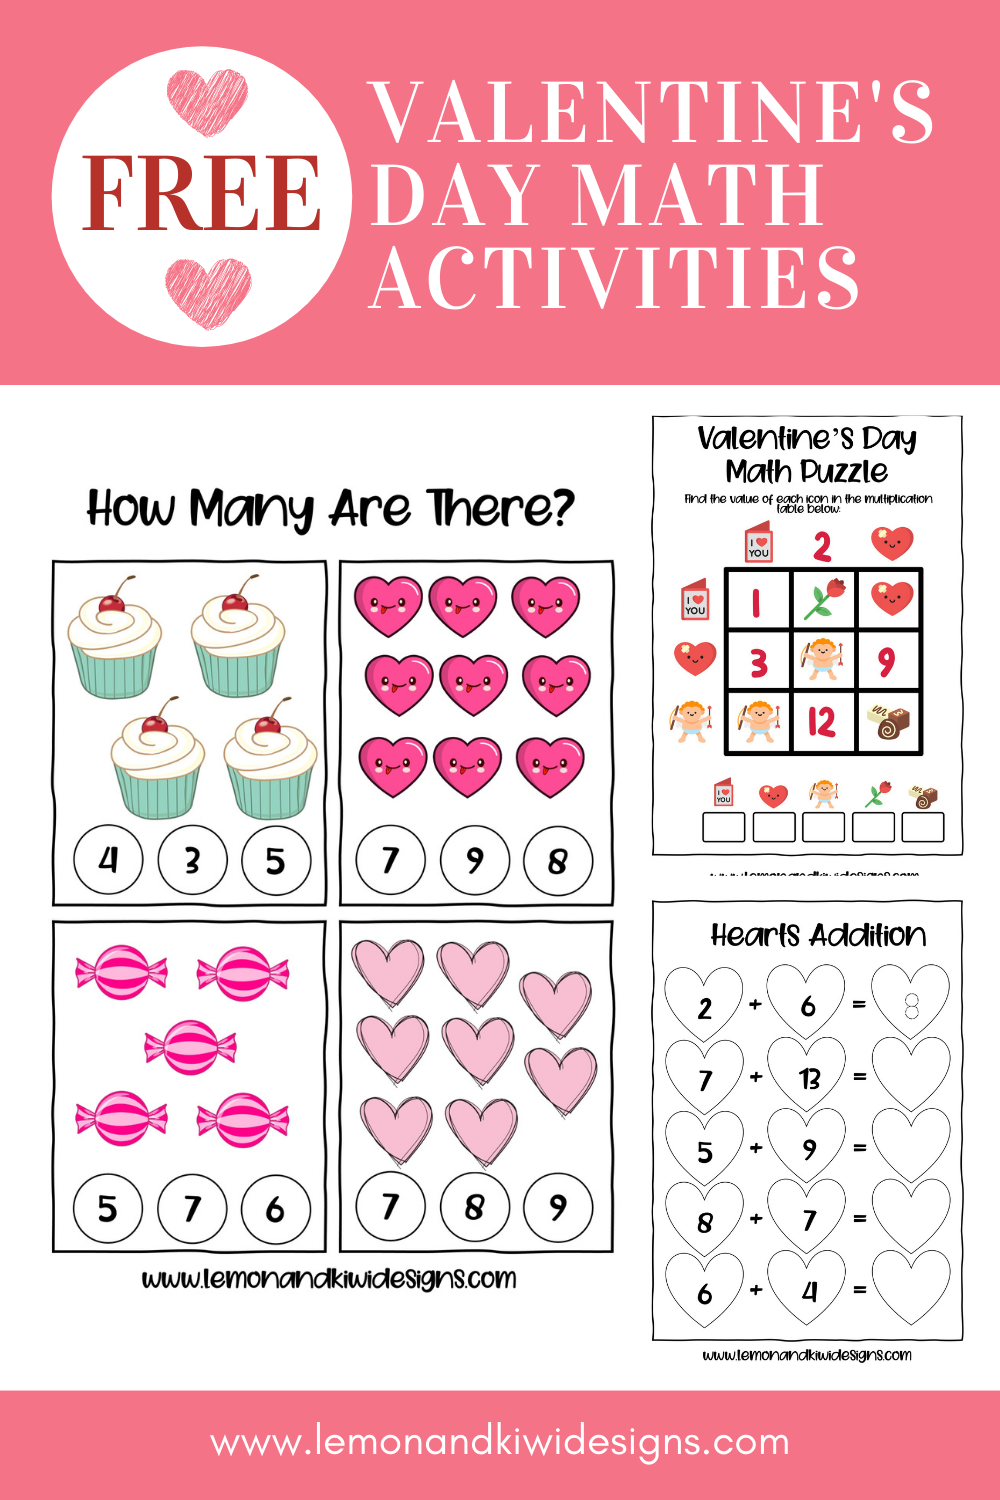 Free Valentine’s Day Math Activities {Printable Book}